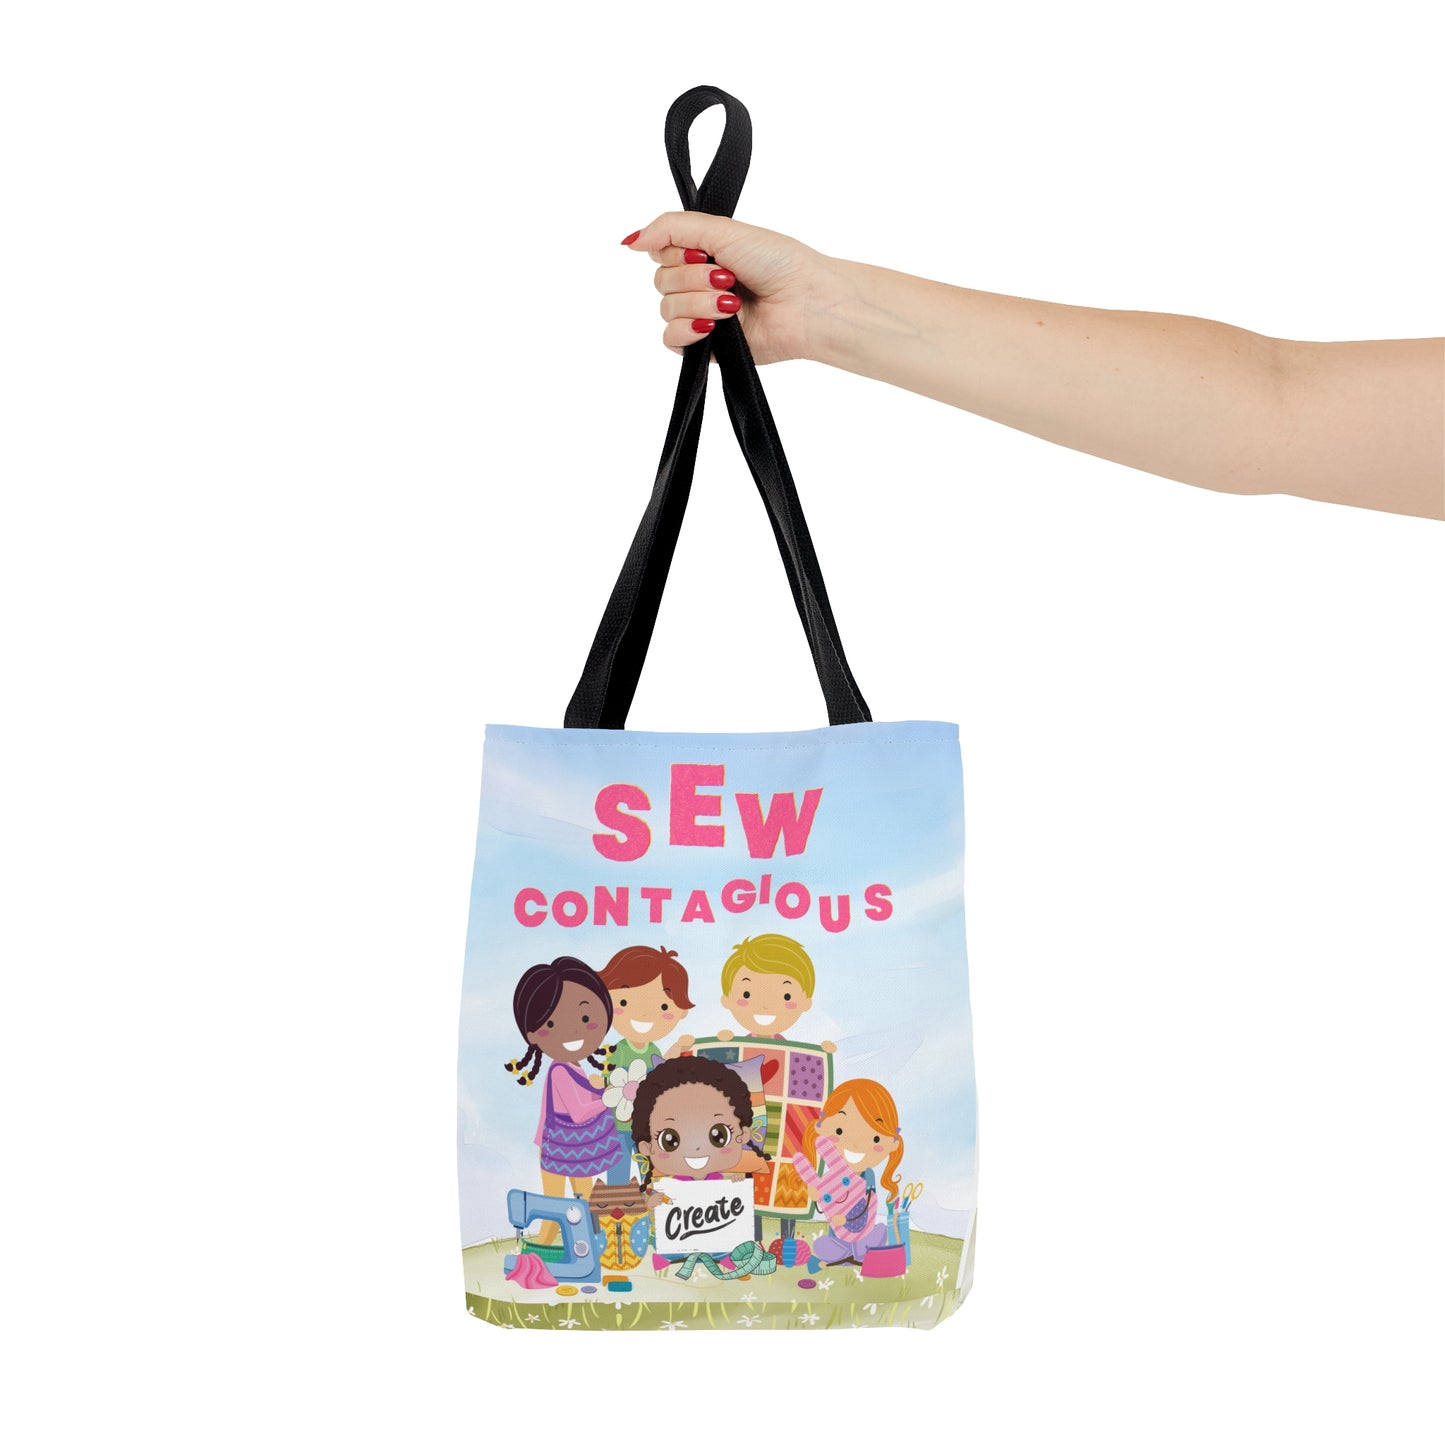 Sew Contagious Tote Bag